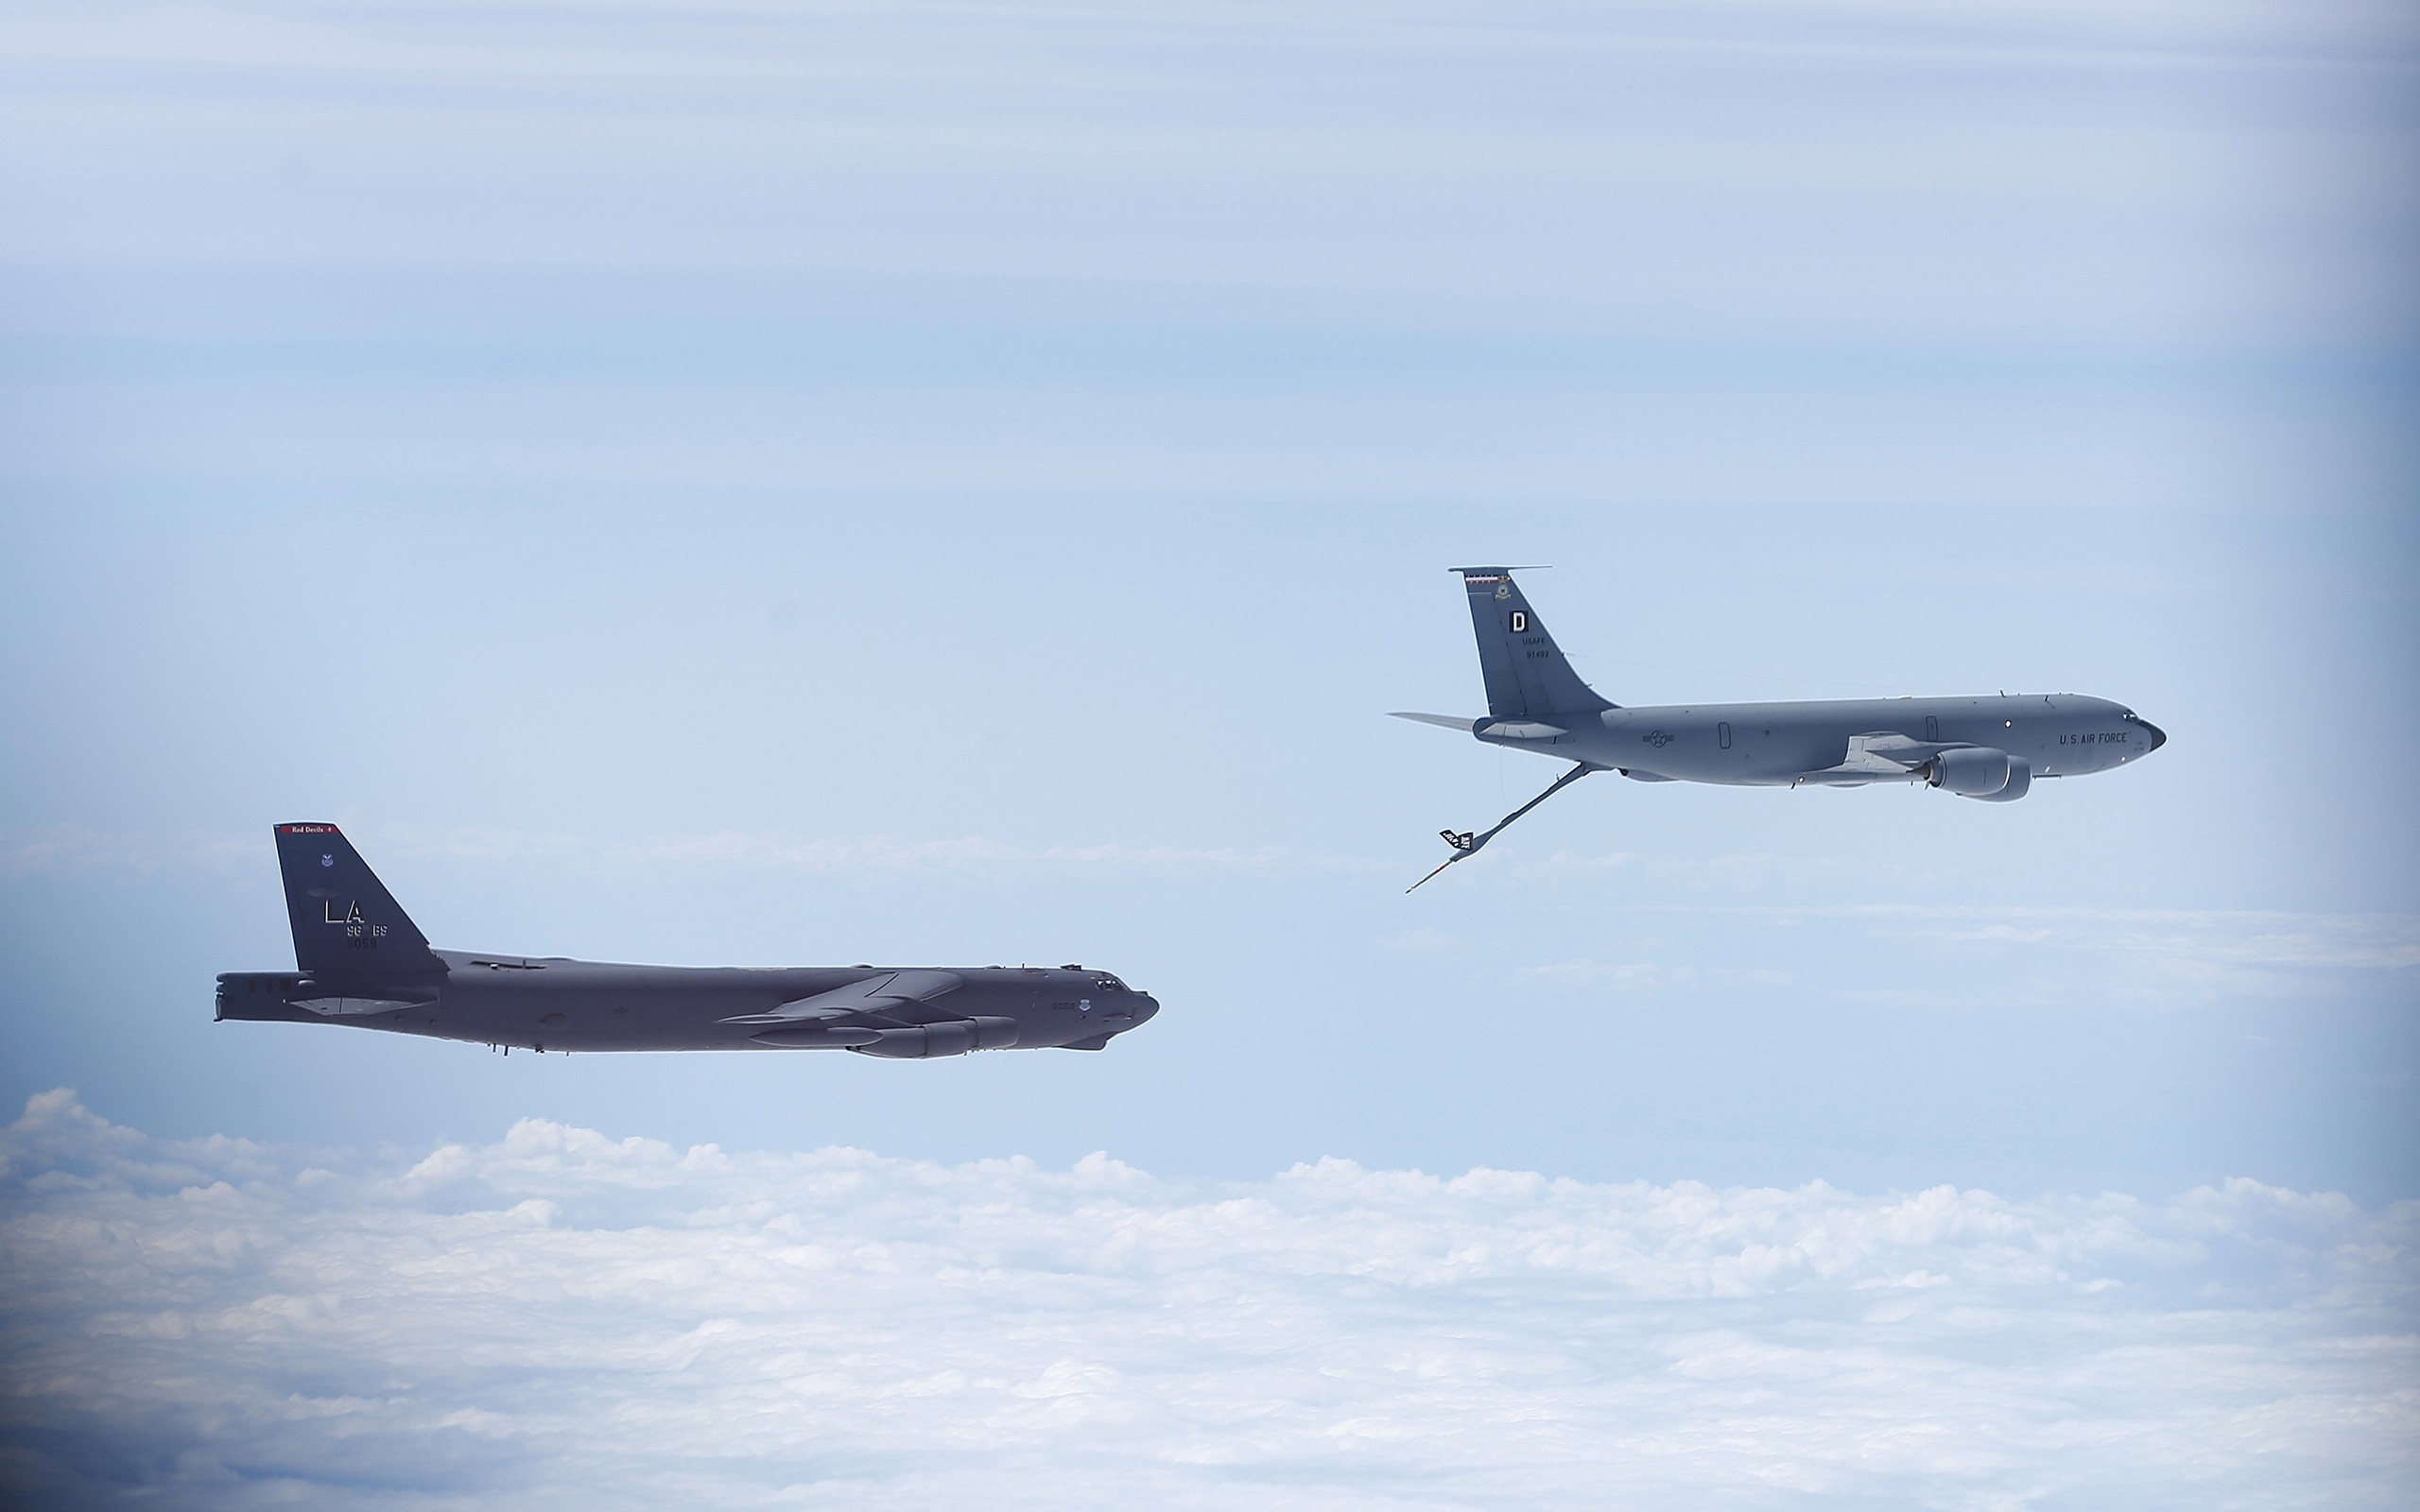 Boeing B 52 Stratofortress, Boeing KC 135 Stratotanker, Aircraft, Military aircraft, Strategic bomber, Bomber, Mid air refueling Wallpaper